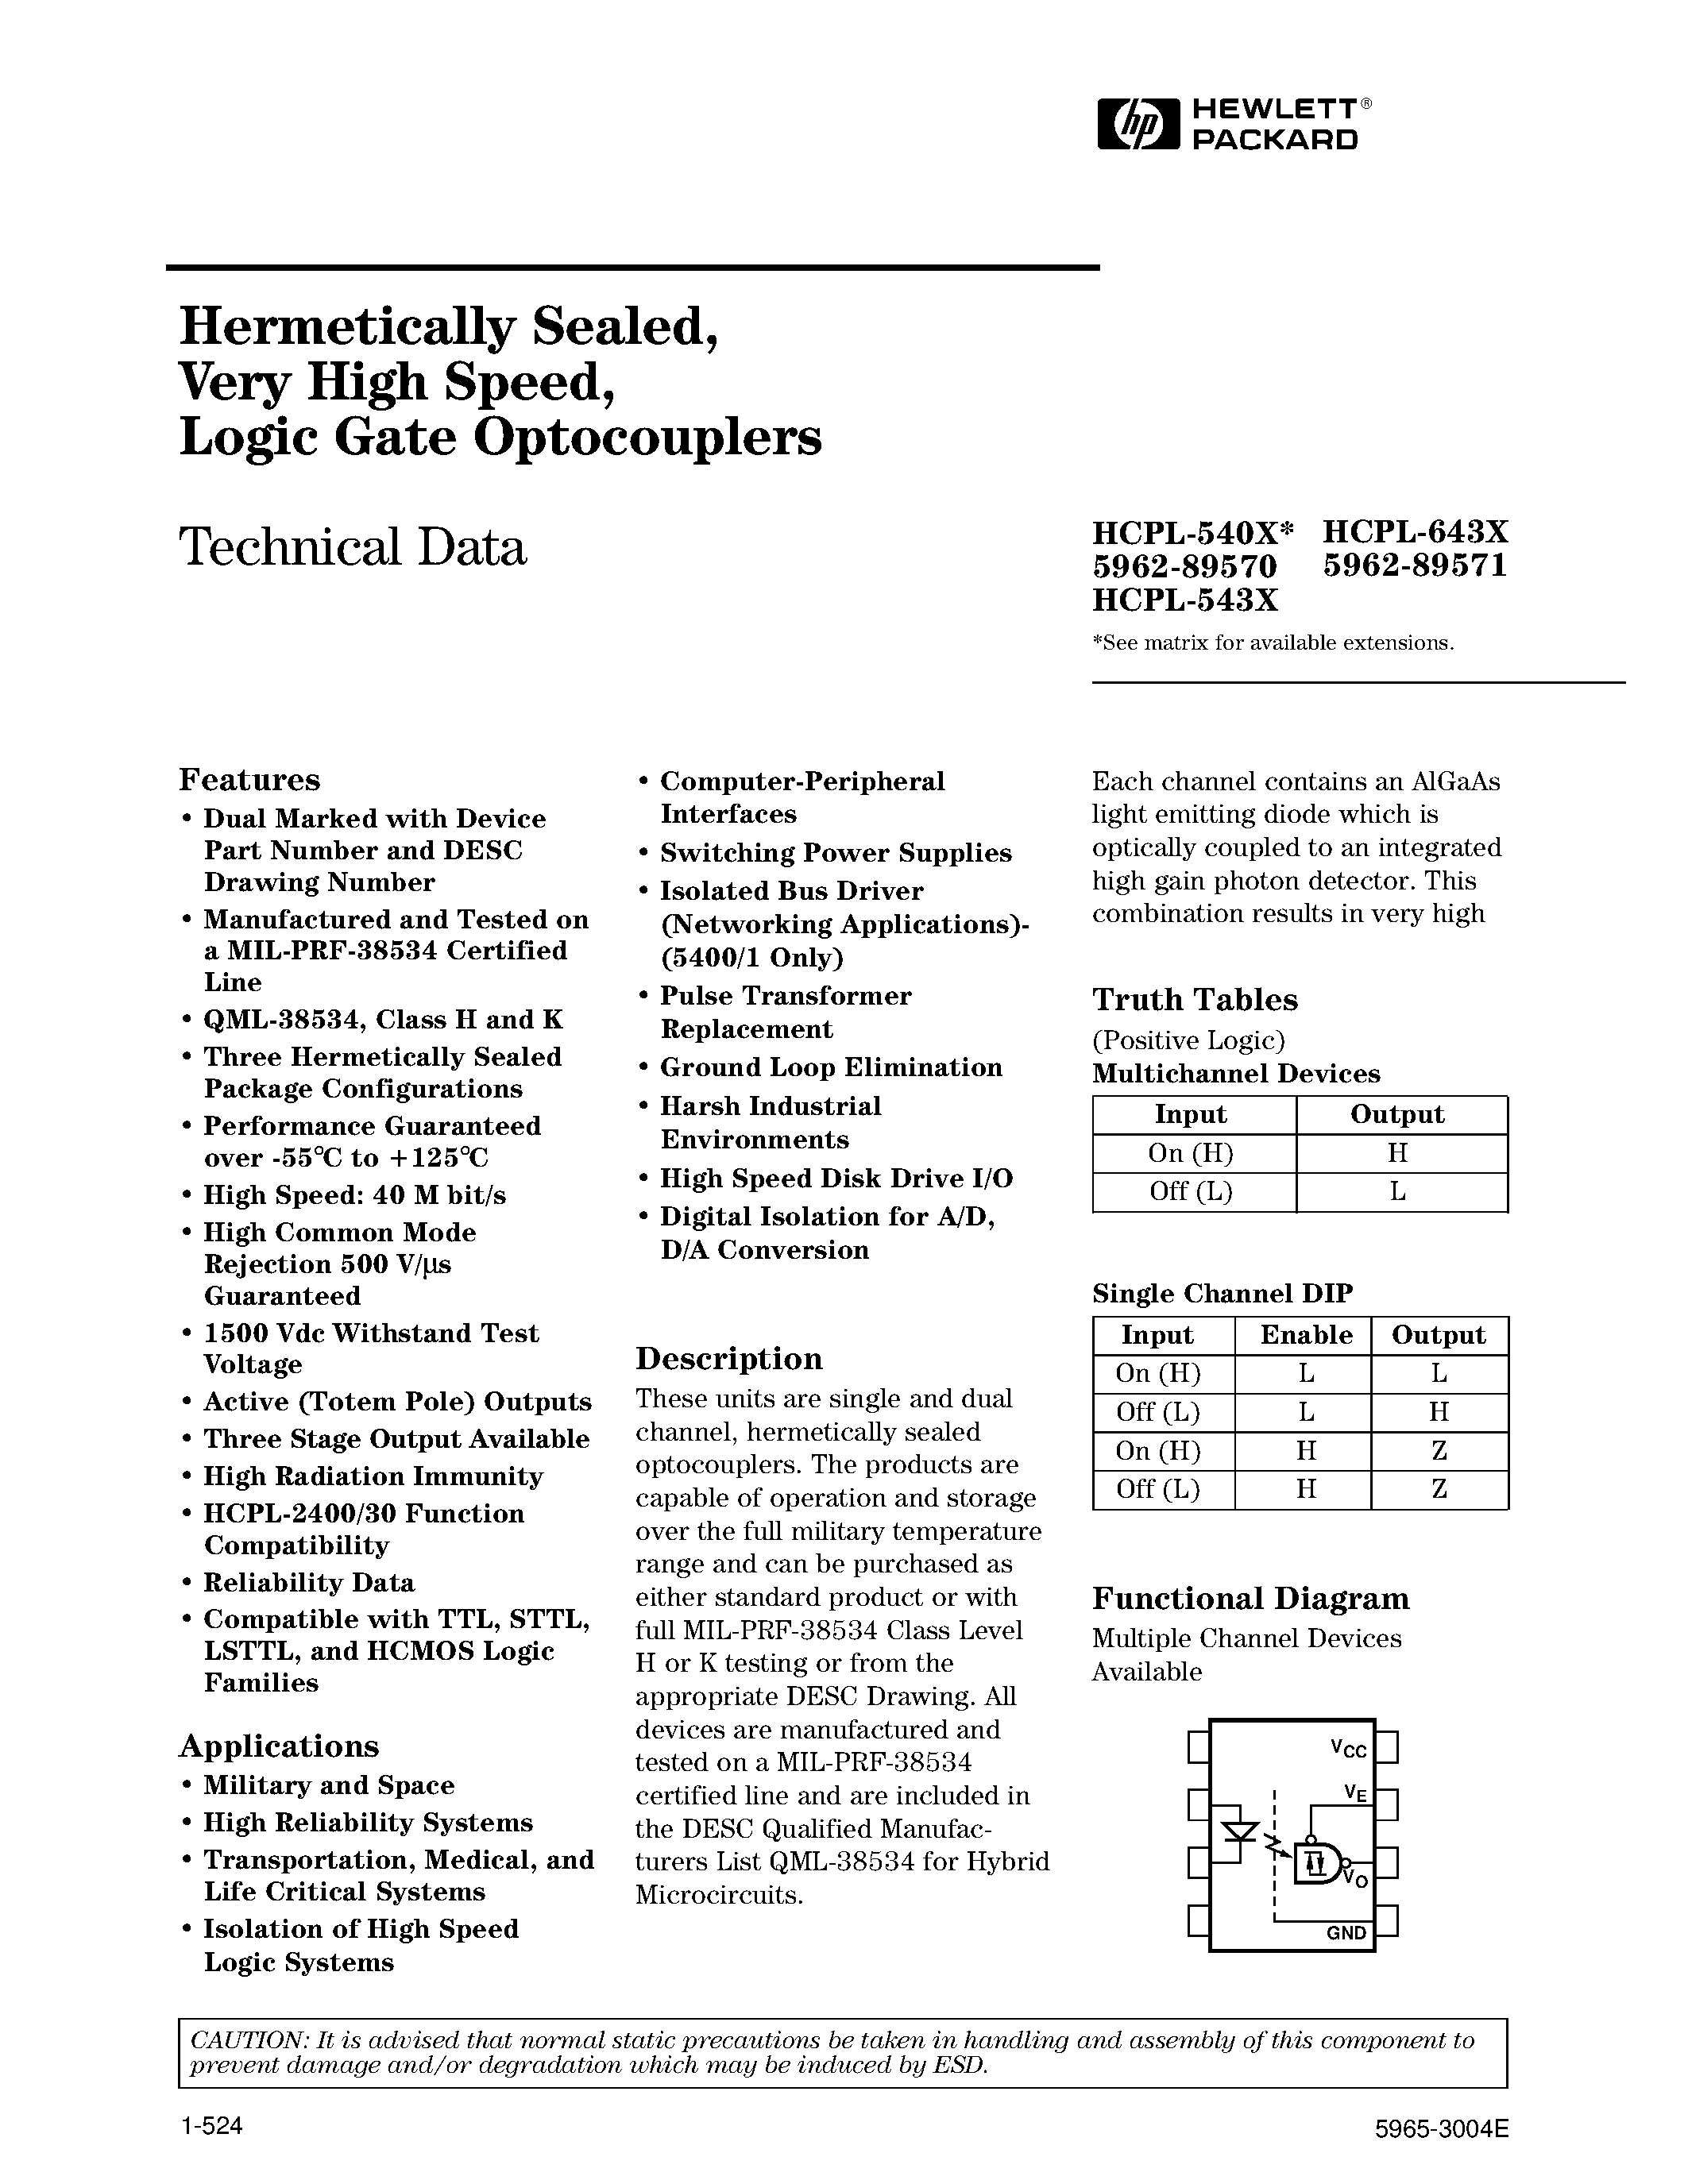 Datasheet HCPL-5400 - Hermetically Sealed/ Very High Speed/ Logic Gate Optocouplers page 1